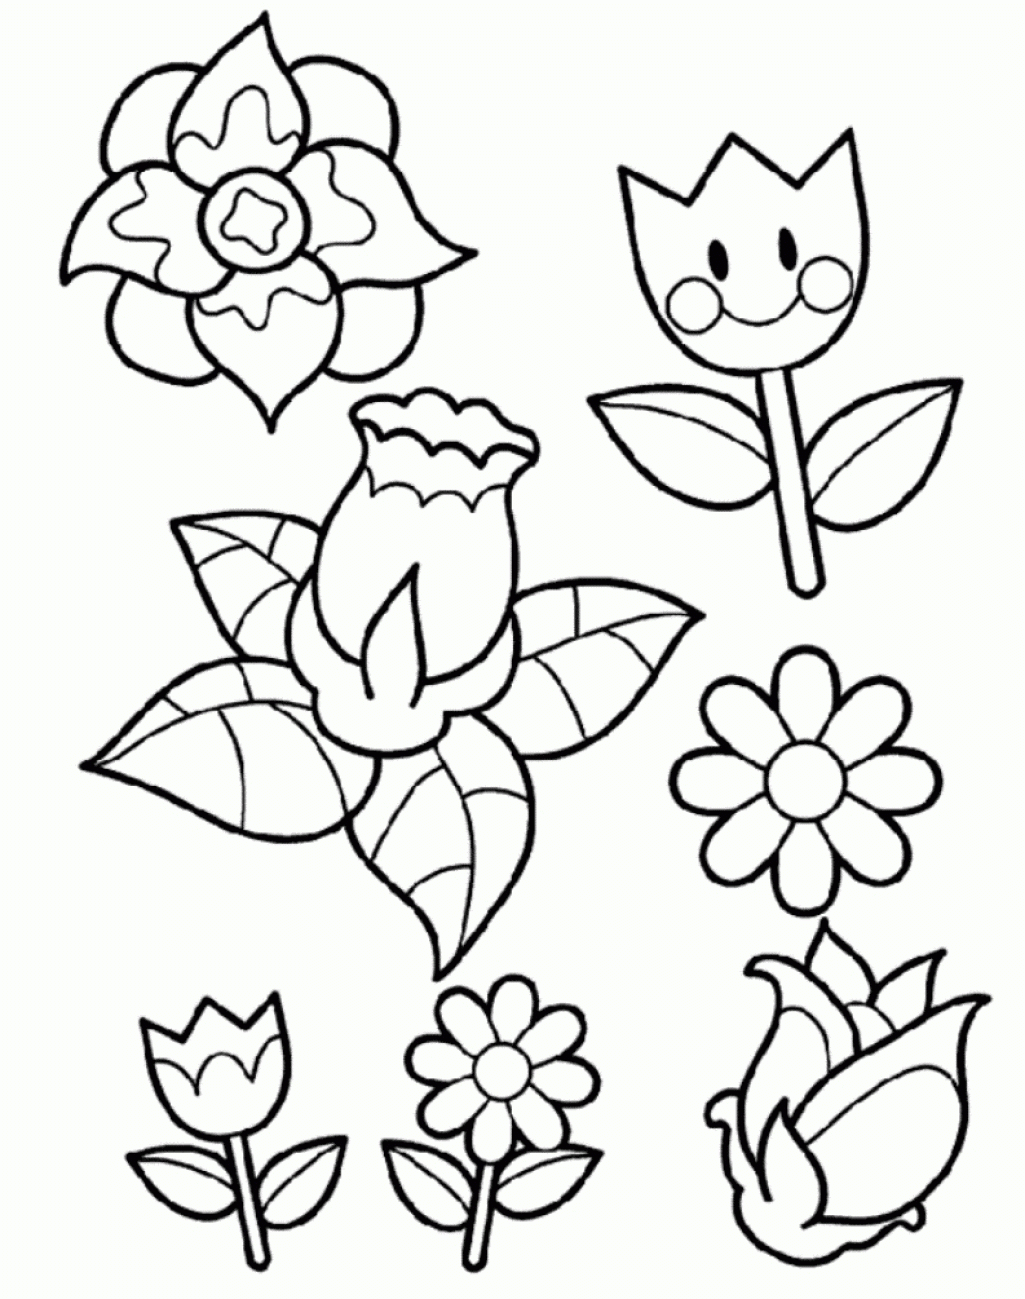 Spring Flowers Coloring Pages For Kids Printable Free Coloing ...